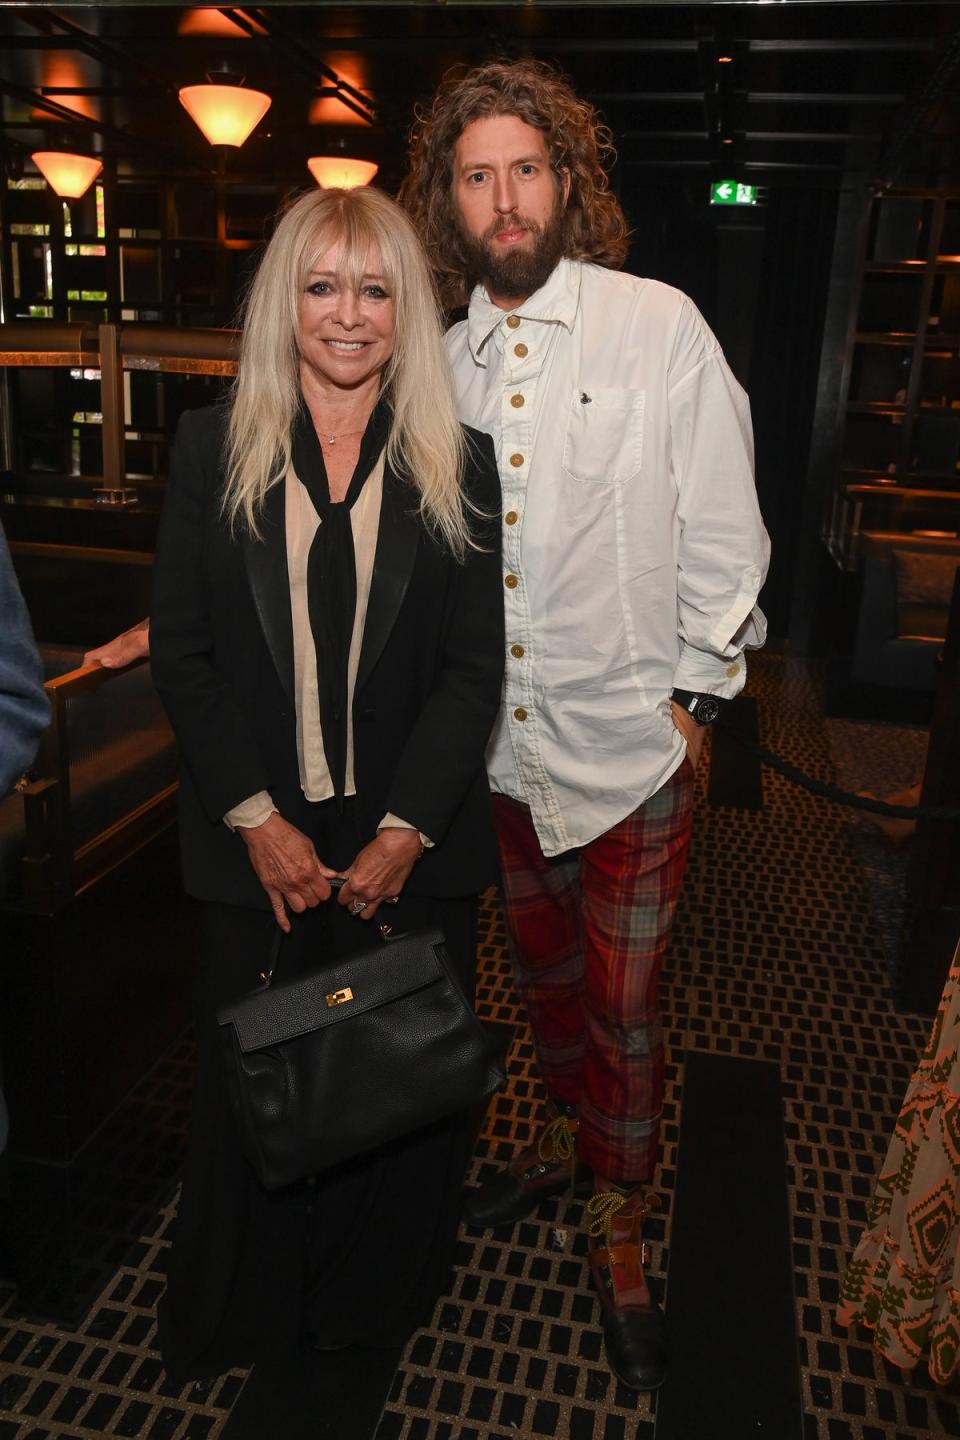 Wood posed for photos with her chef pal at the Gelida Summer Summit at London’s Nobu Portman Hotel (Dave Benett)